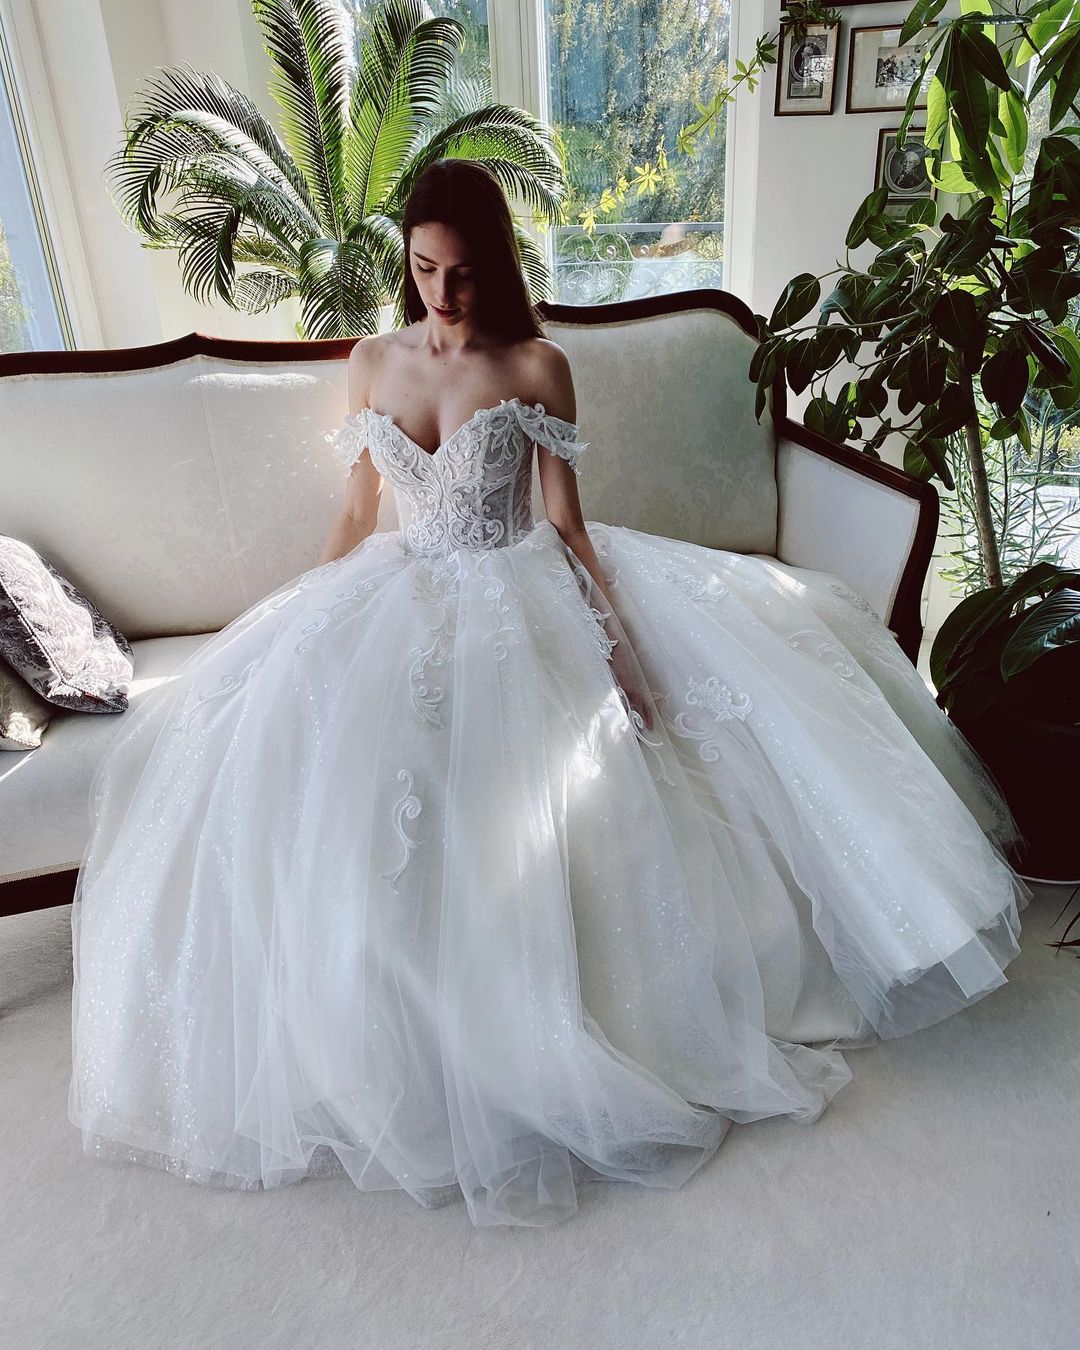 Charming Long A-line Off-the-shoulder Tulle Wedding Dress with Glitter-BIZTUNNEL